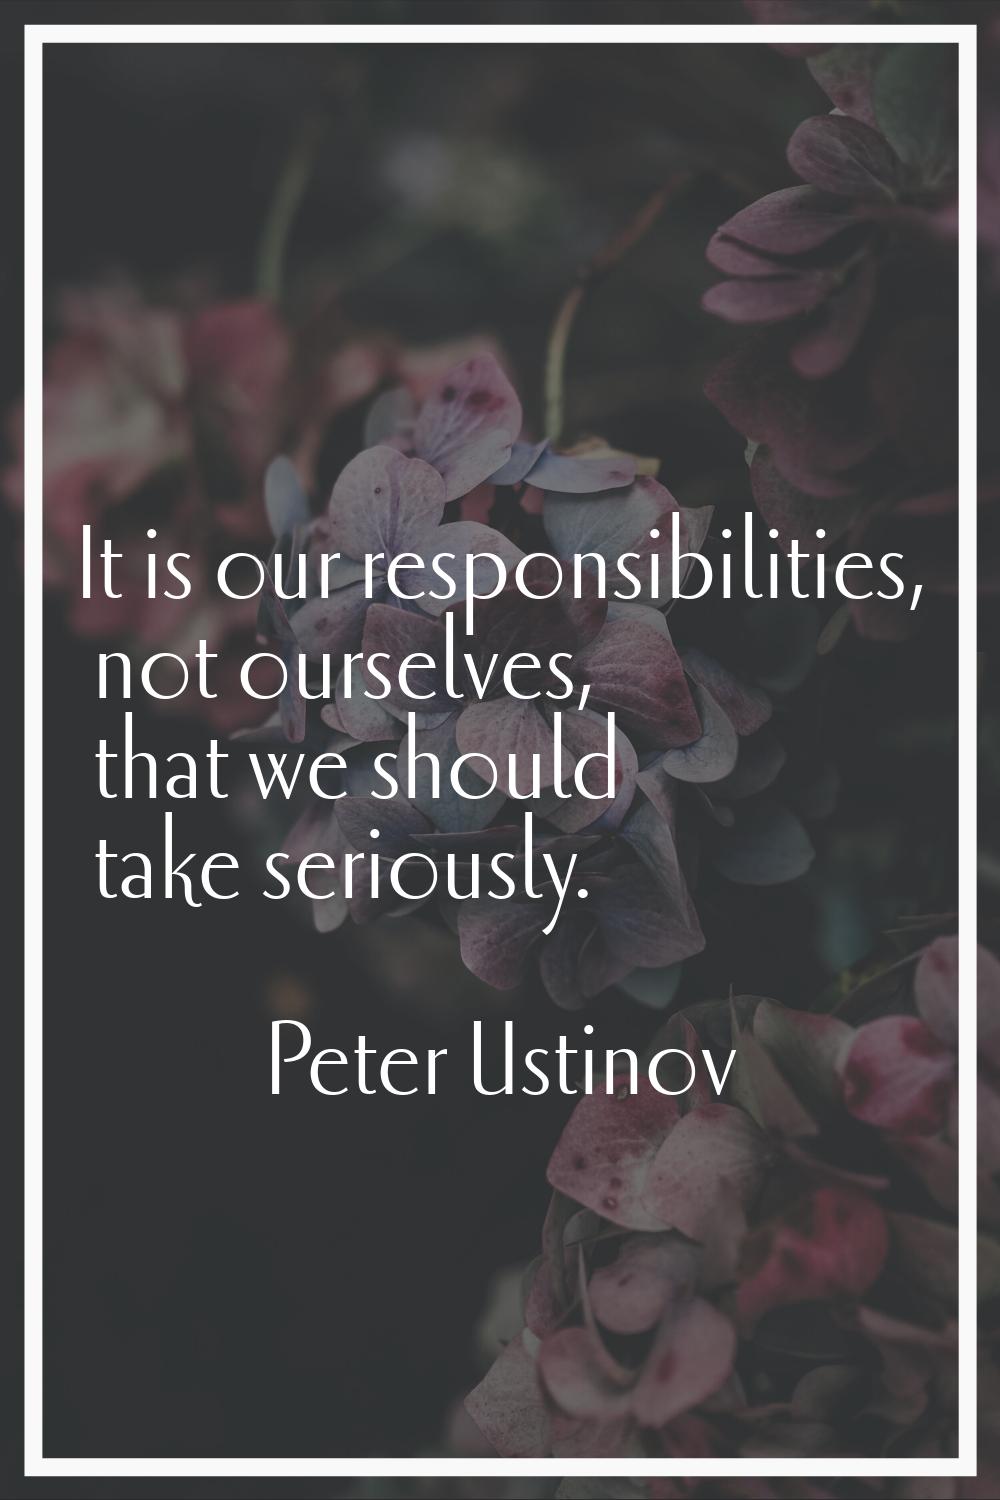 It is our responsibilities, not ourselves, that we should take seriously.